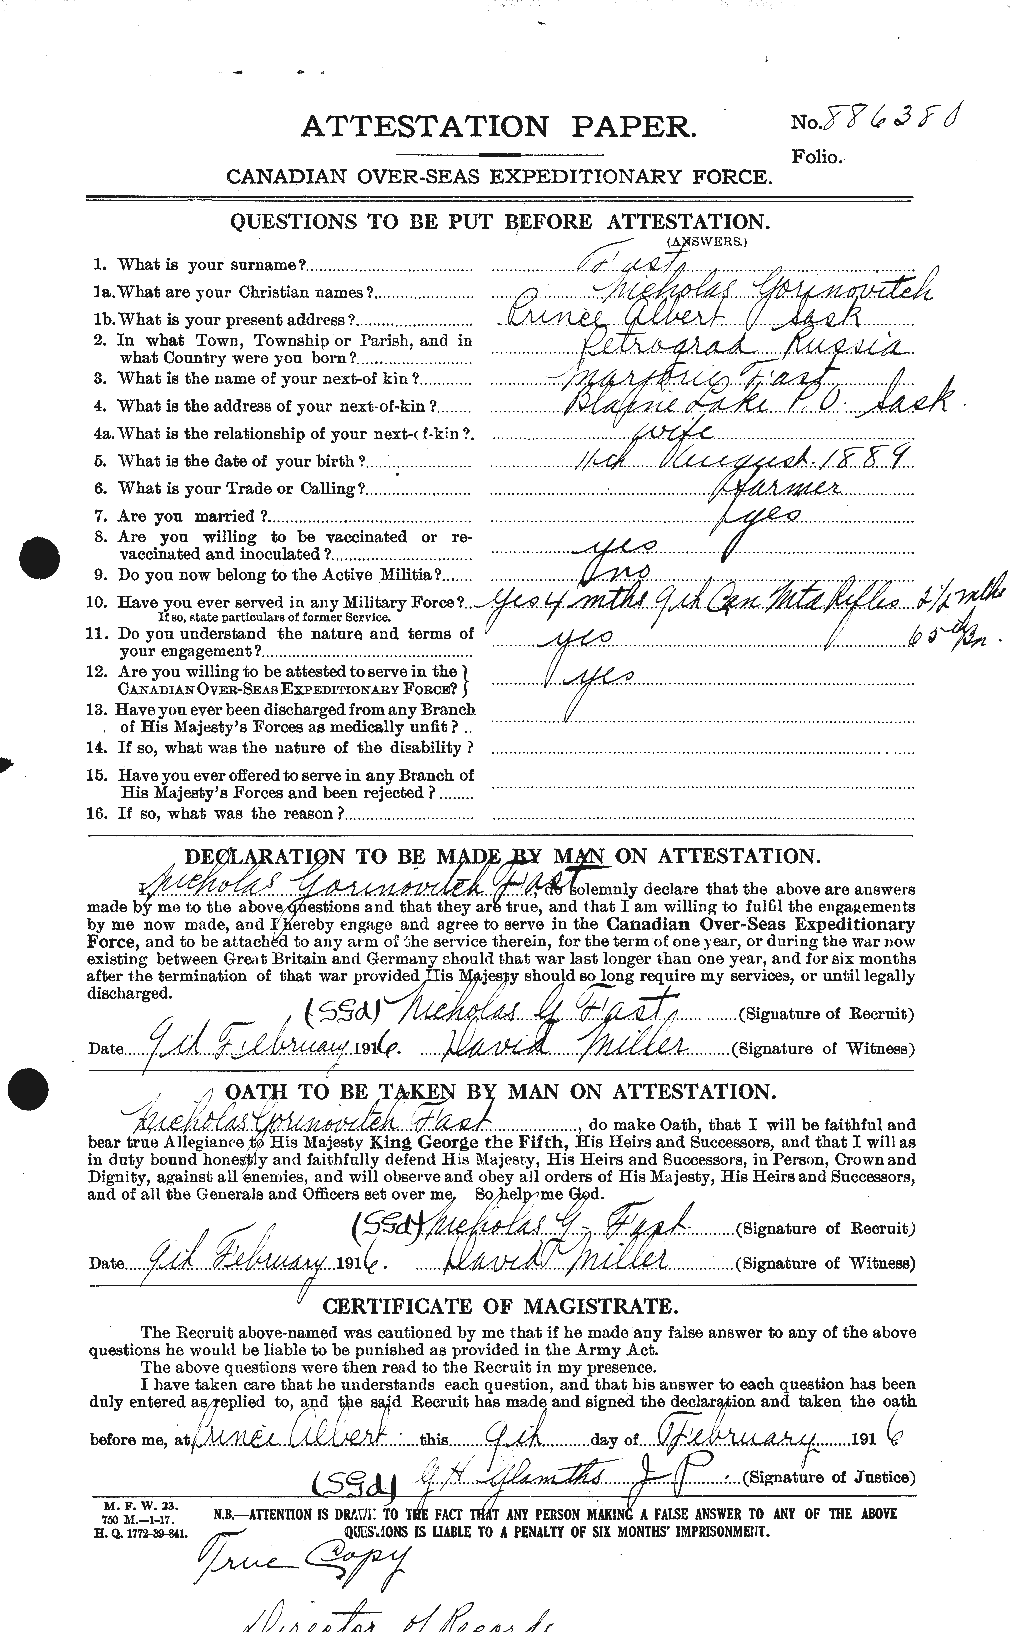 Personnel Records of the First World War - CEF 319266a